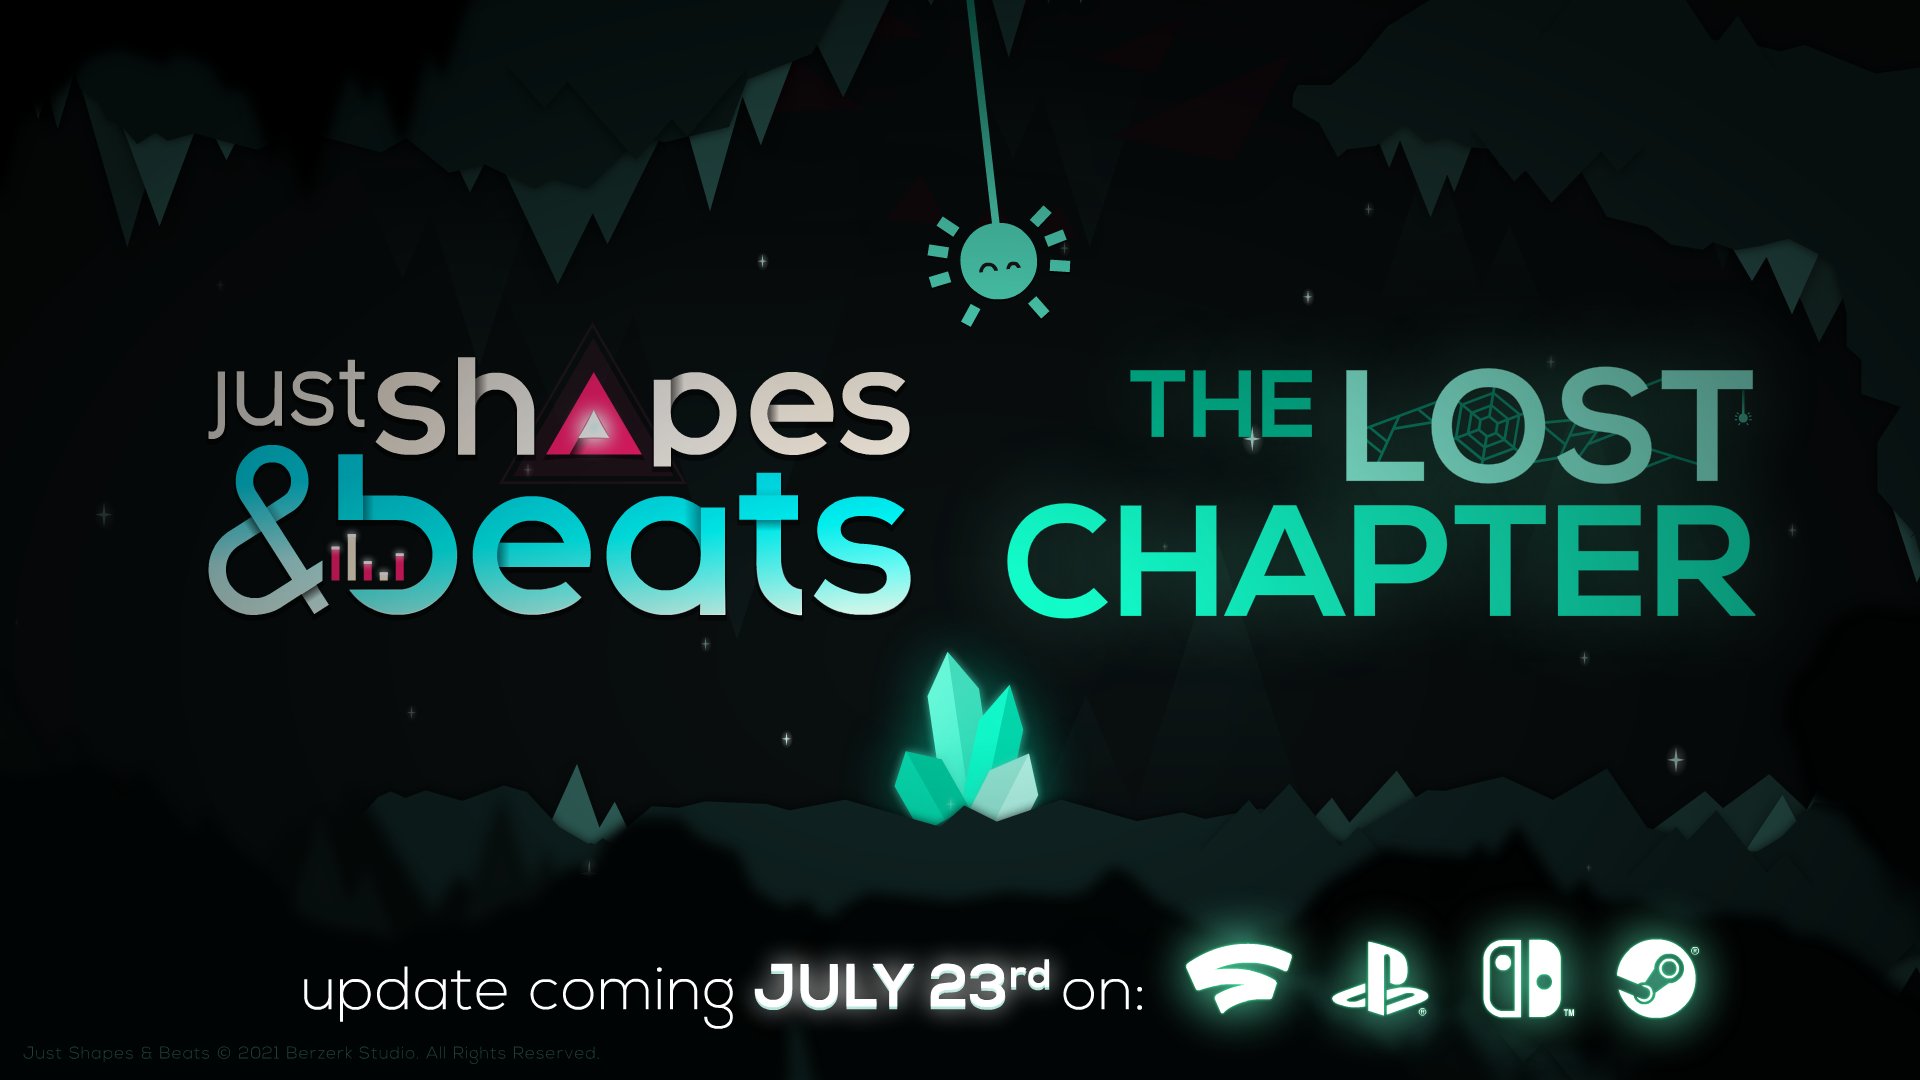 Just Shapes & Beats The Lost Chapter